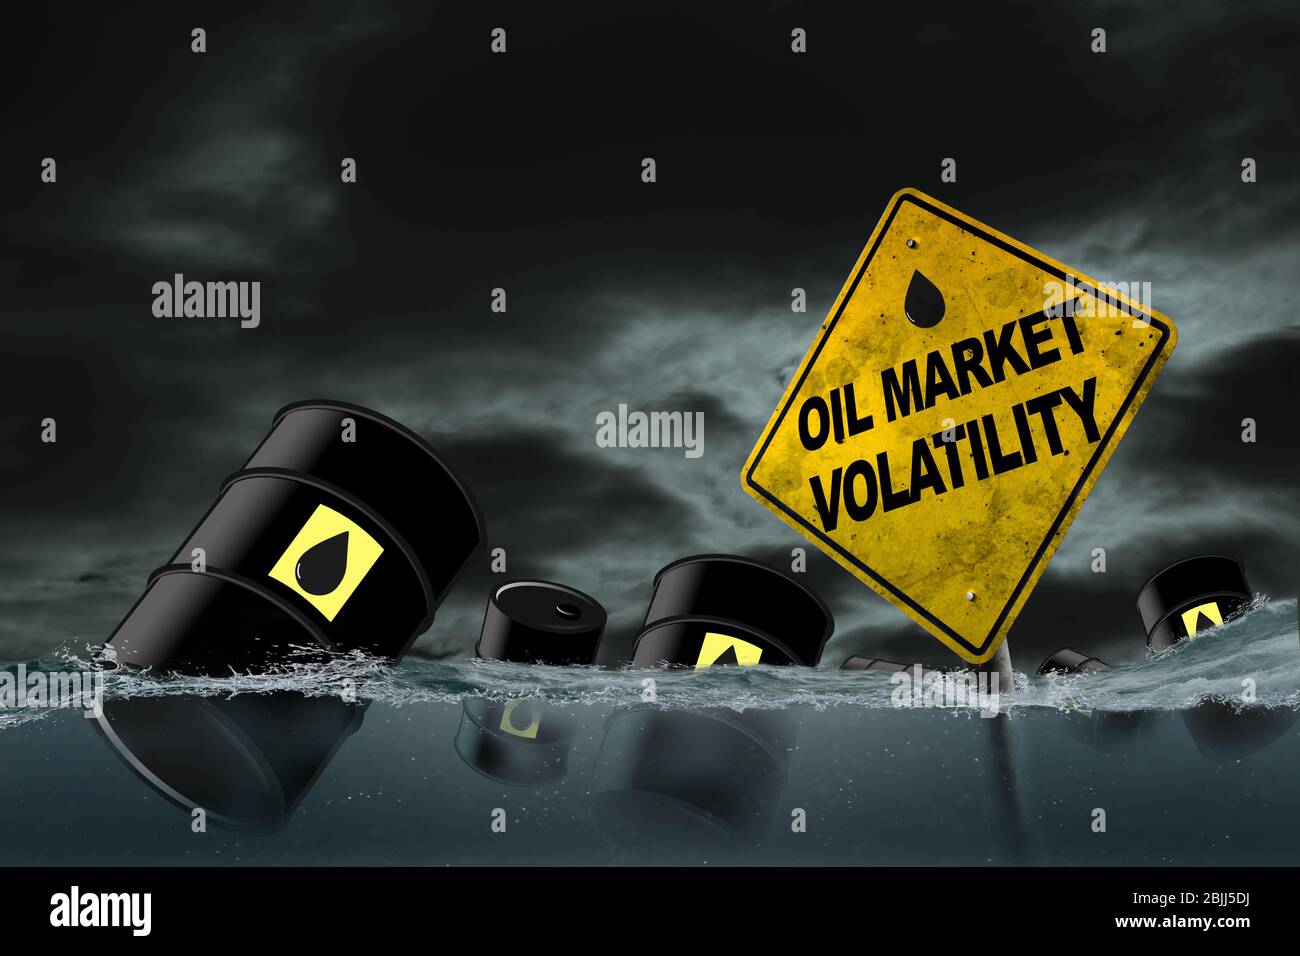 Oil market volatility concept of energy crisis, oil price fluctuations, risk from energy or oil company stock loss from commodity price uncertainty. C Stock Photo